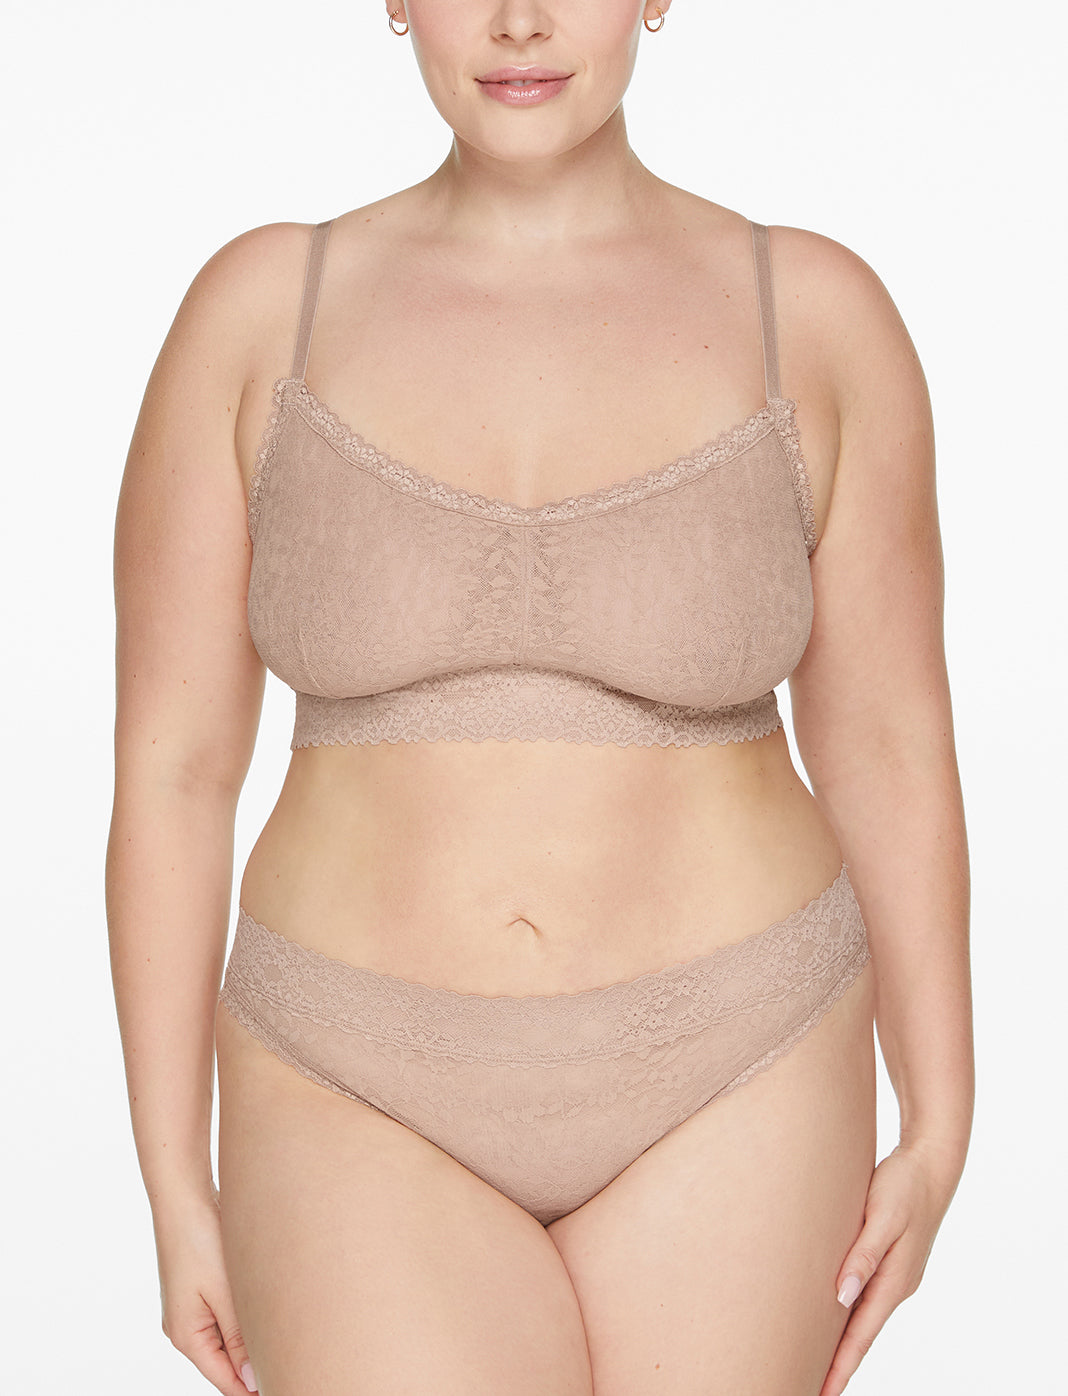 Luvlette Full Coverage Push-up Lace Bra